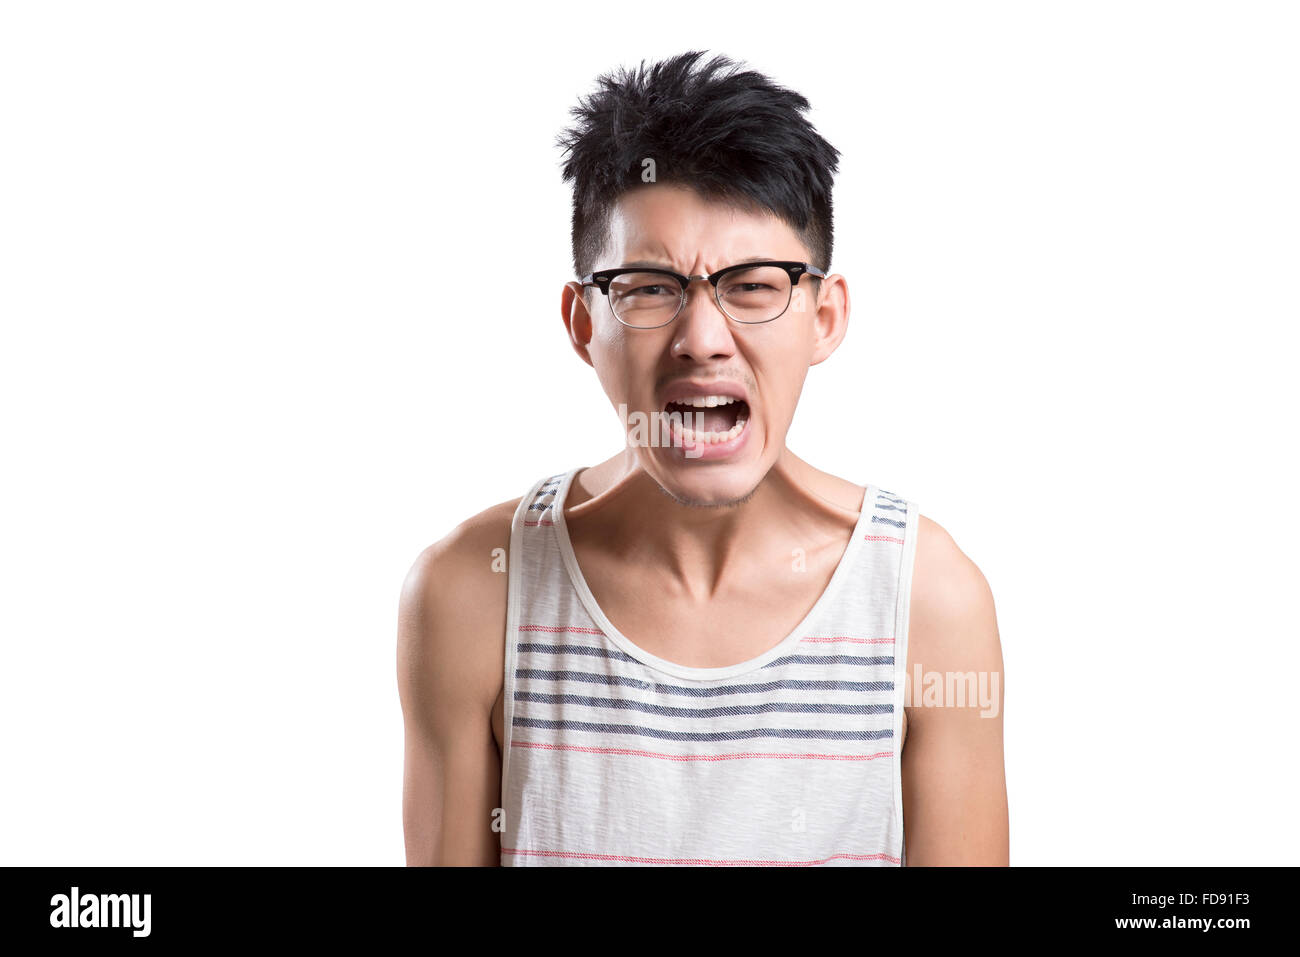 Portrait of young man screaming Stock Photo